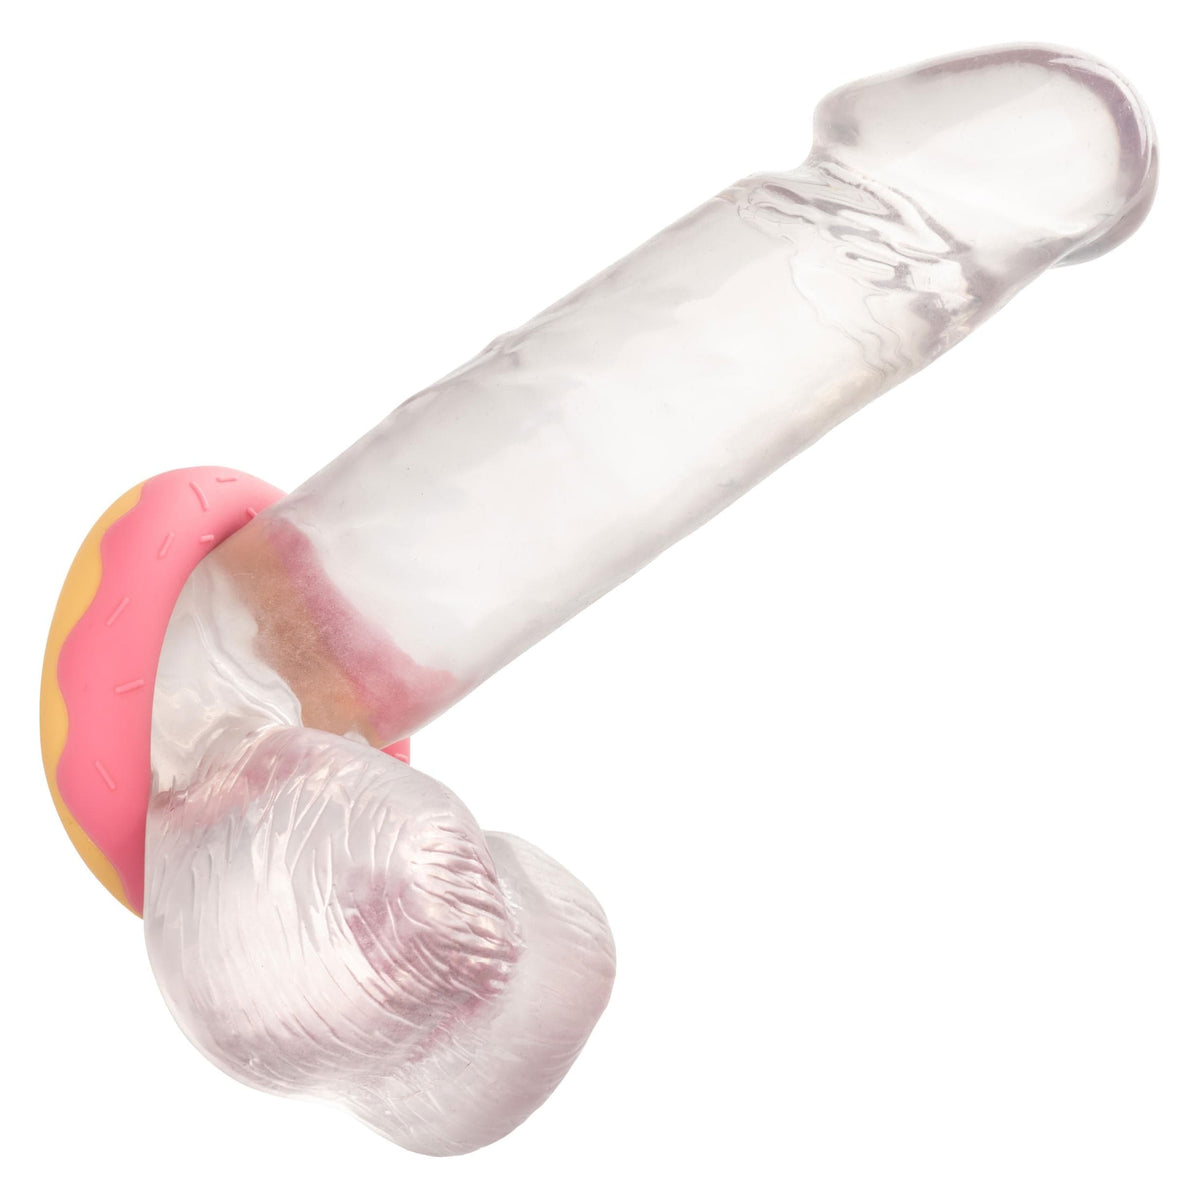 naughty bits dickin donuts silicone donut cock ring pink